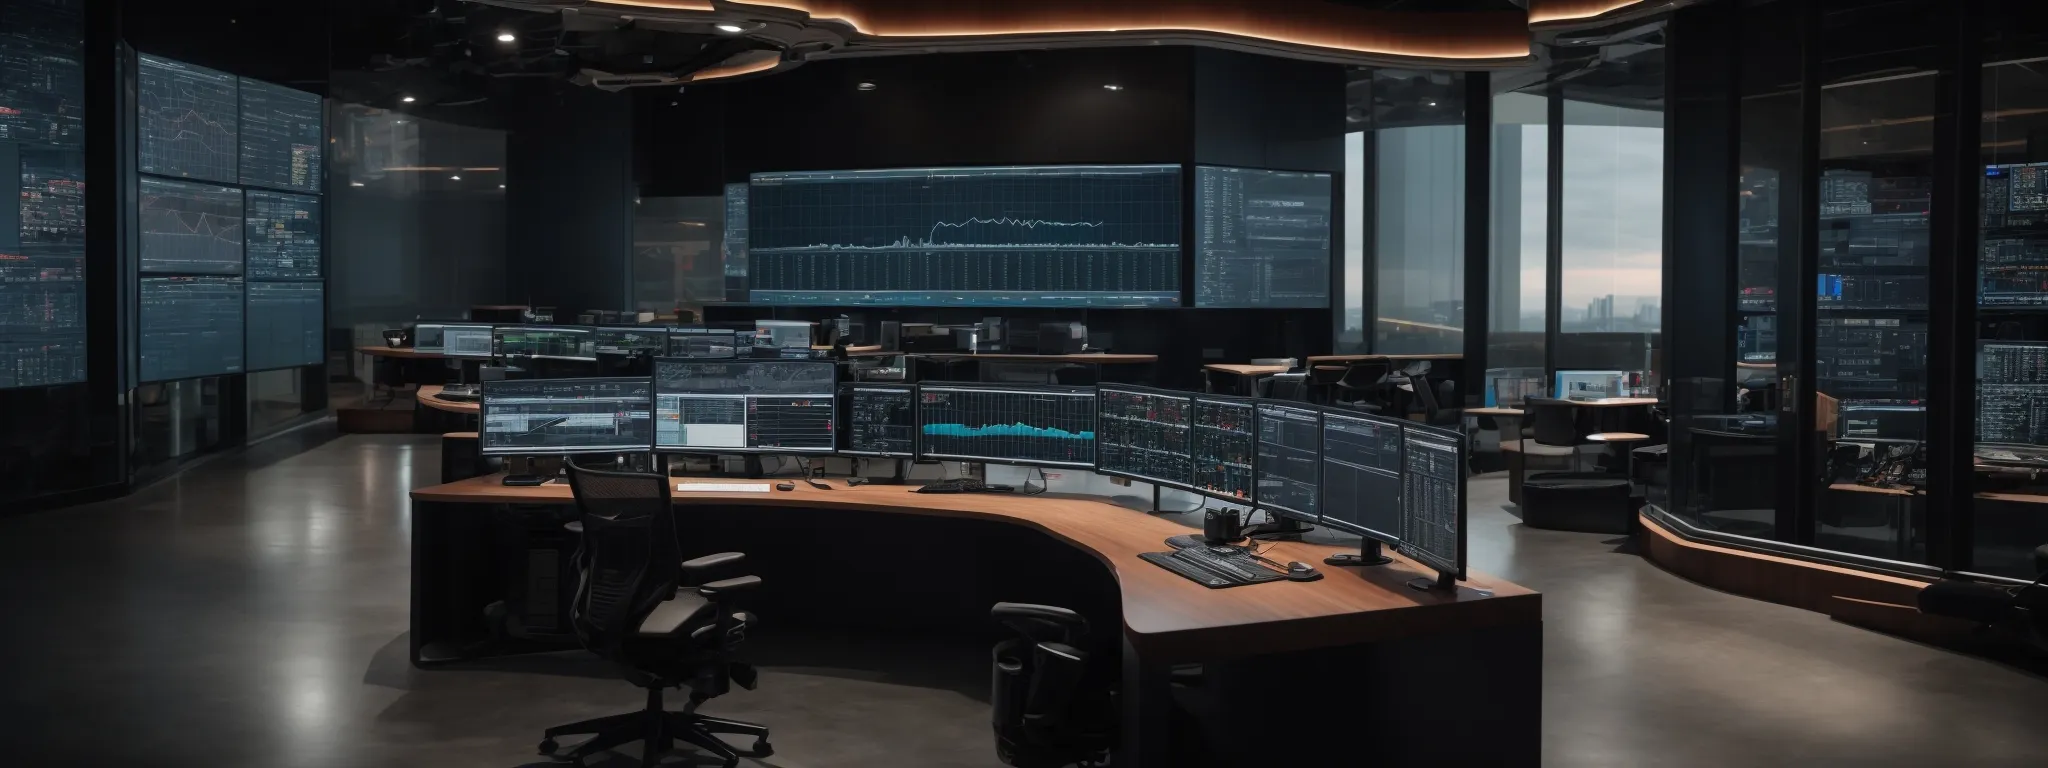 a sleek, modern control room with multiple monitors displaying graphs and schedules, with collaborative workspace areas visible in the background.